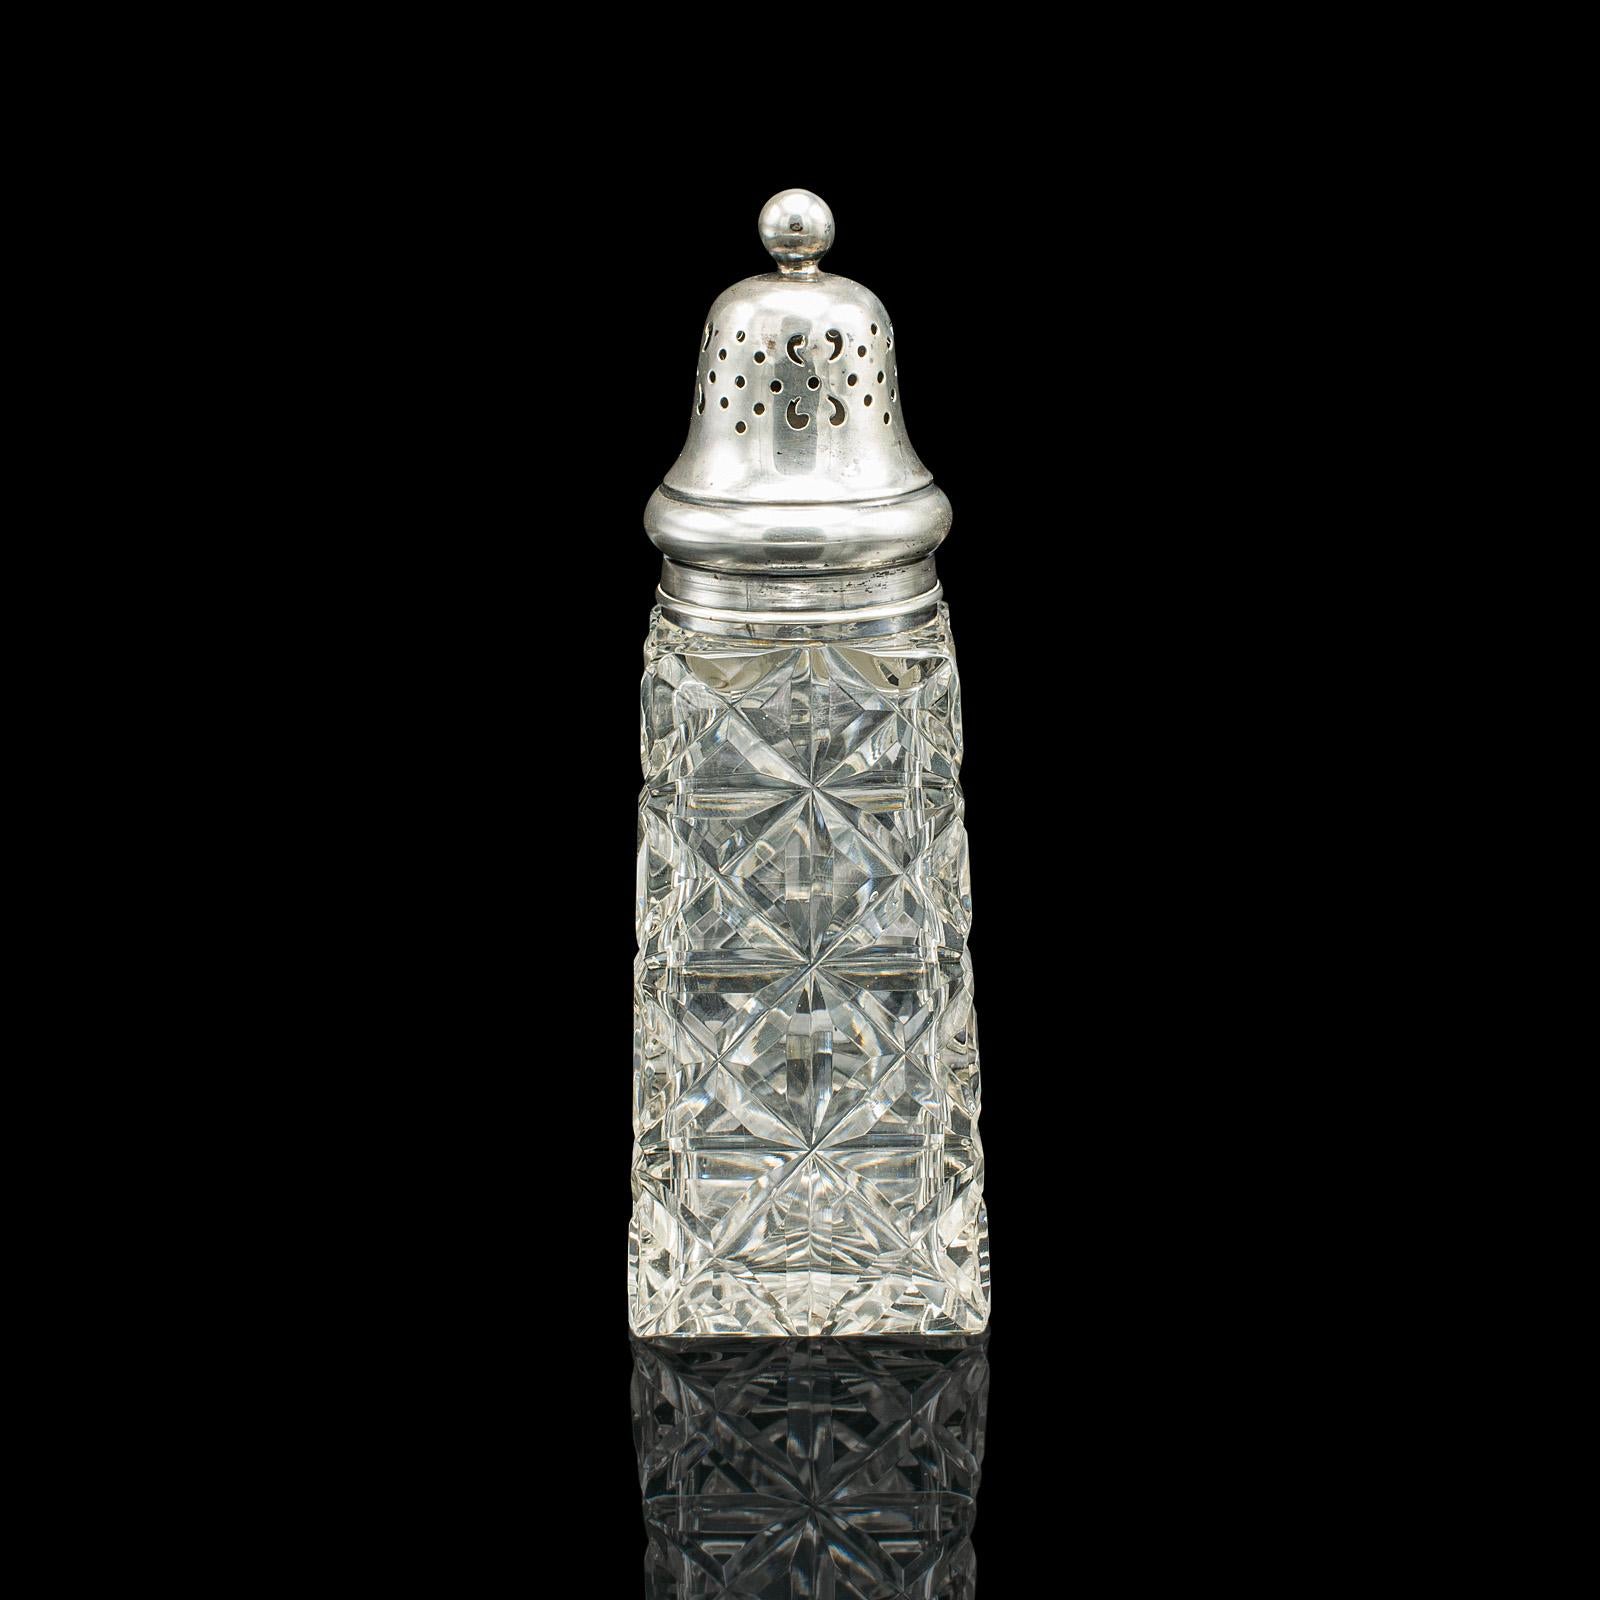 This is a vintage sugar shaker. An English, cut glass and sterling silver caster by James Deakin & Son, dating to the early 20th century, hallmarked in 1929.

Add a dash of glamour to the breakfast table or afternoon tea
Displays a desirable aged